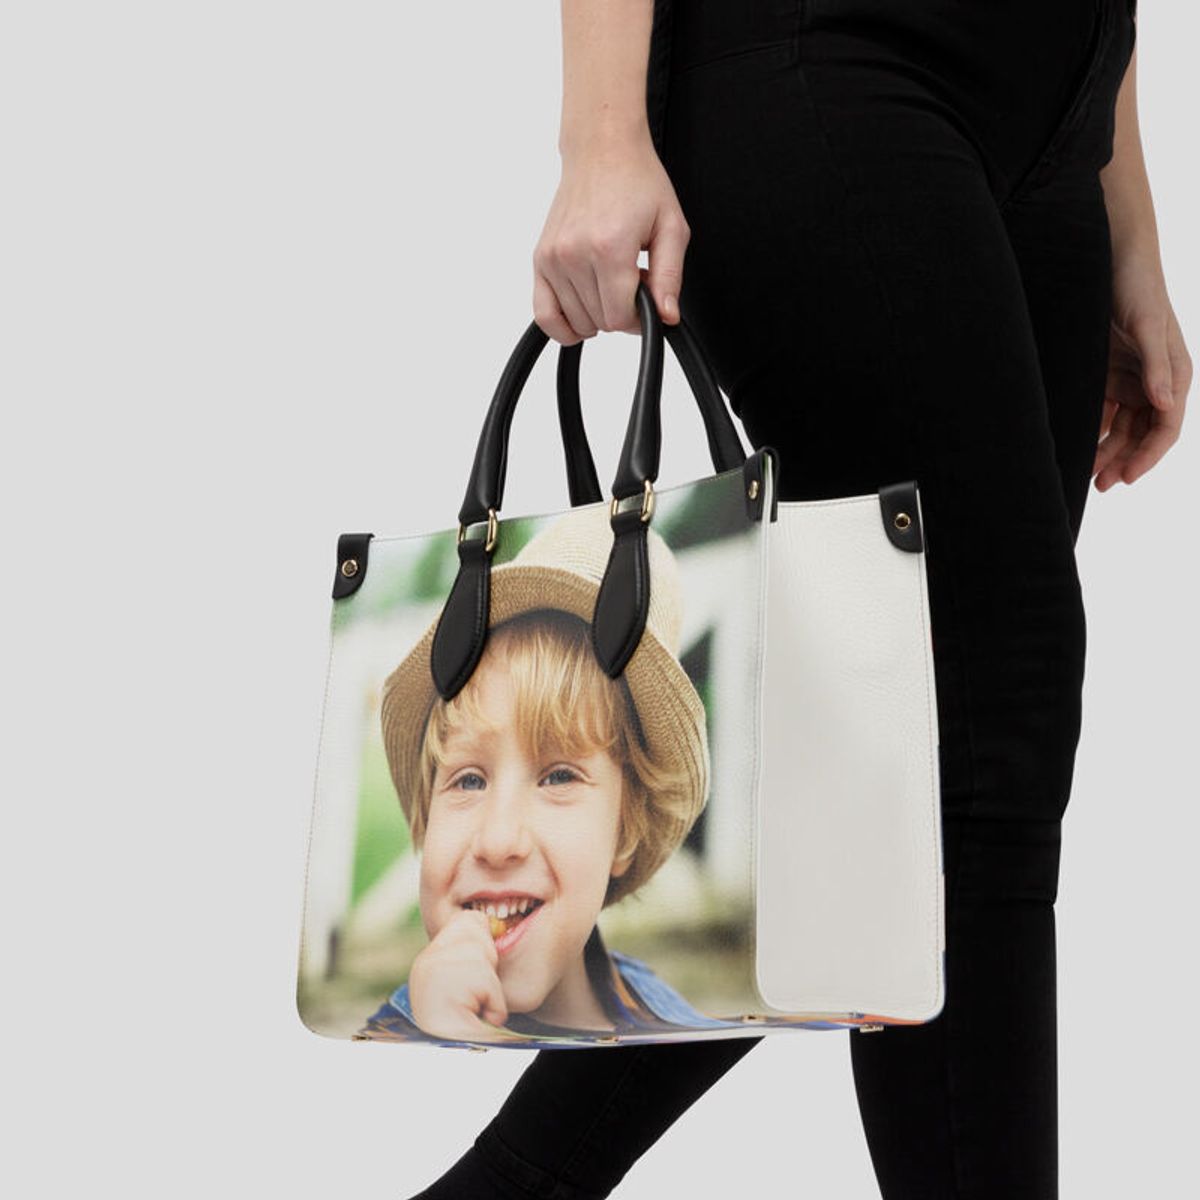 Personalised Shopping Bags